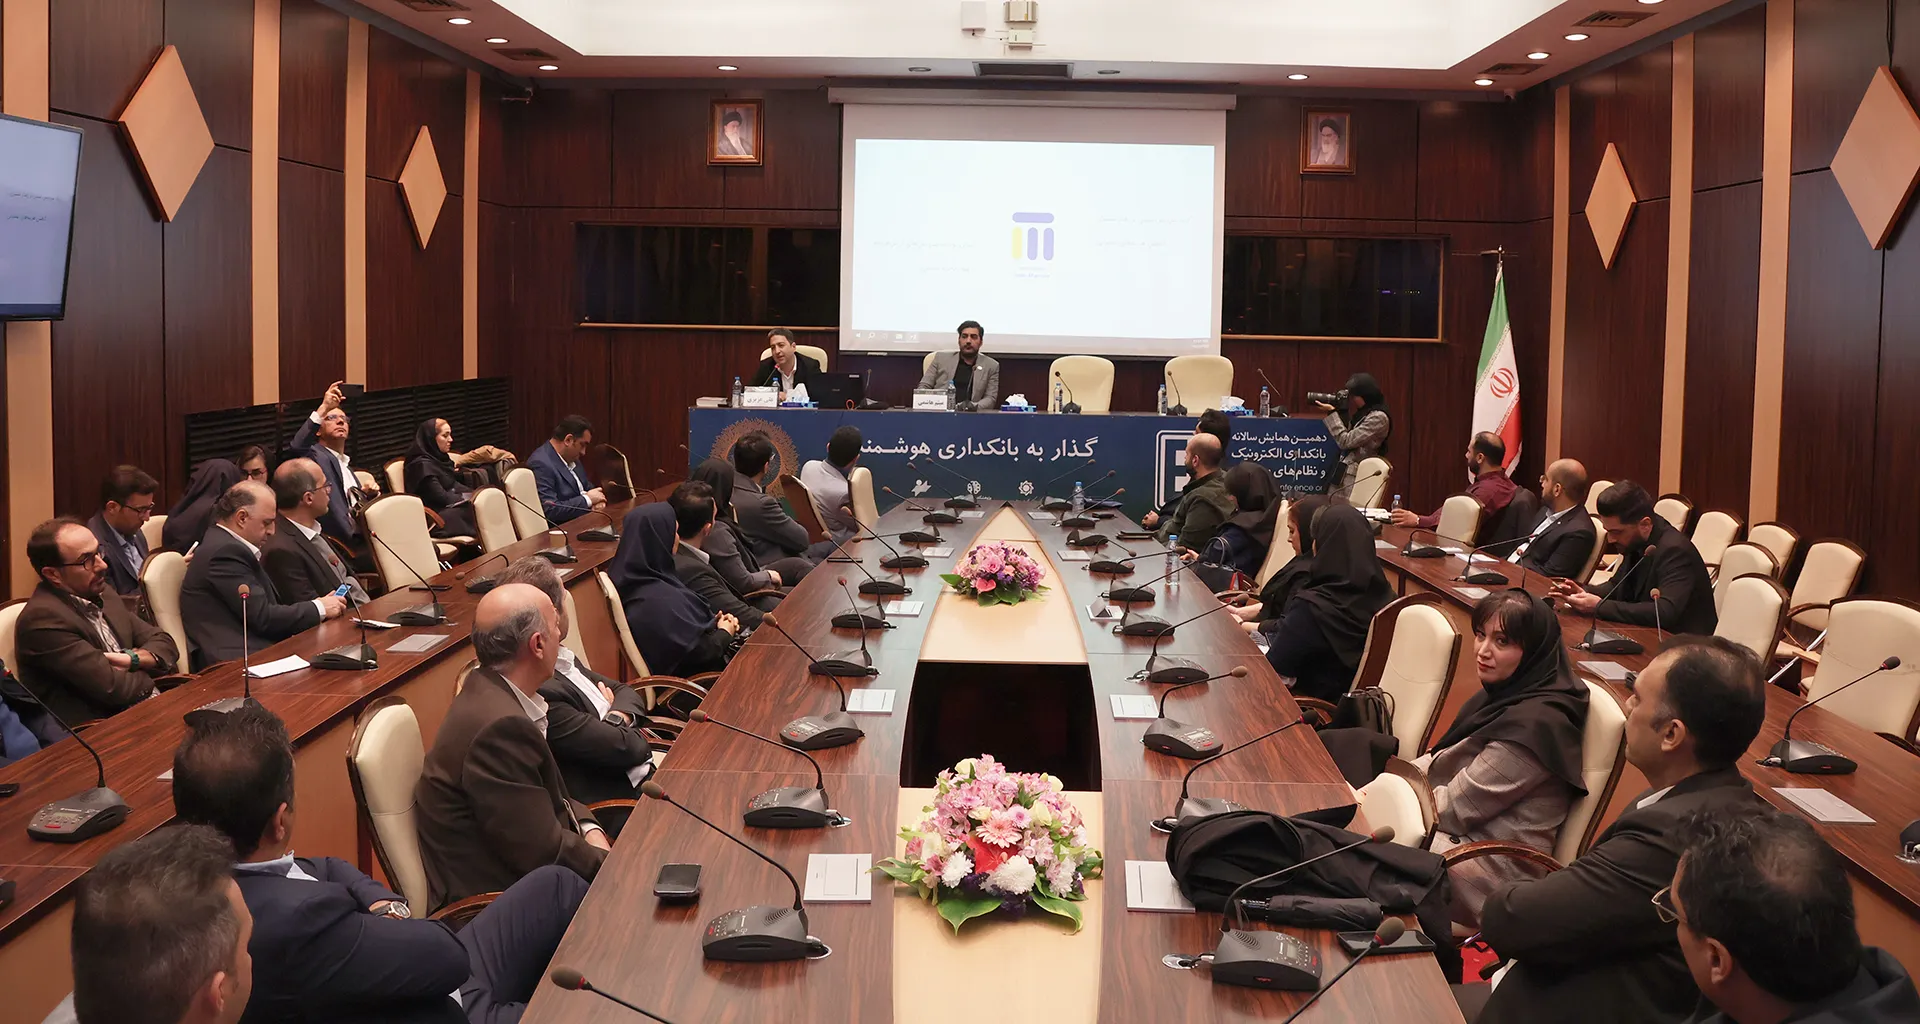 10th-Annual-Conference-on-Electronic-Banking-Payment-System-workshop